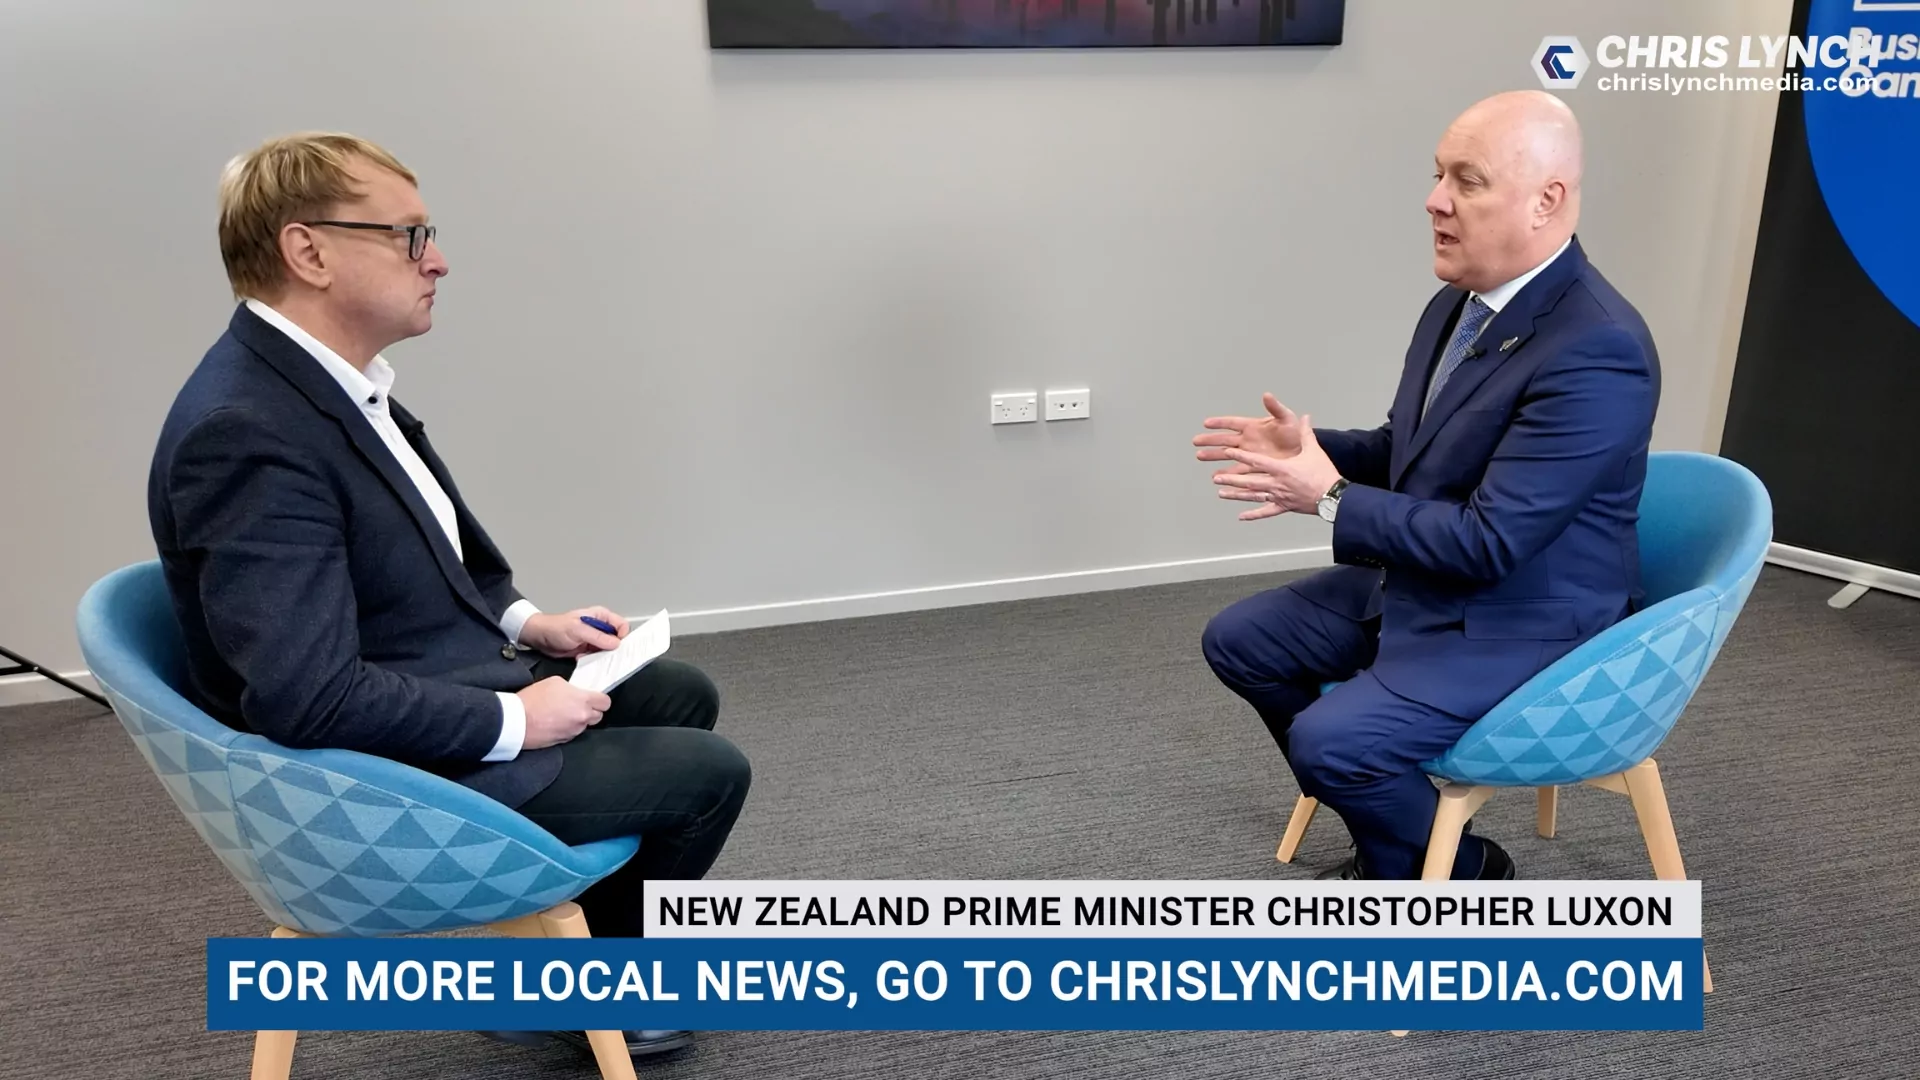 Chris Lynch talks to New Zealand Prime Minister Christopher Luxon